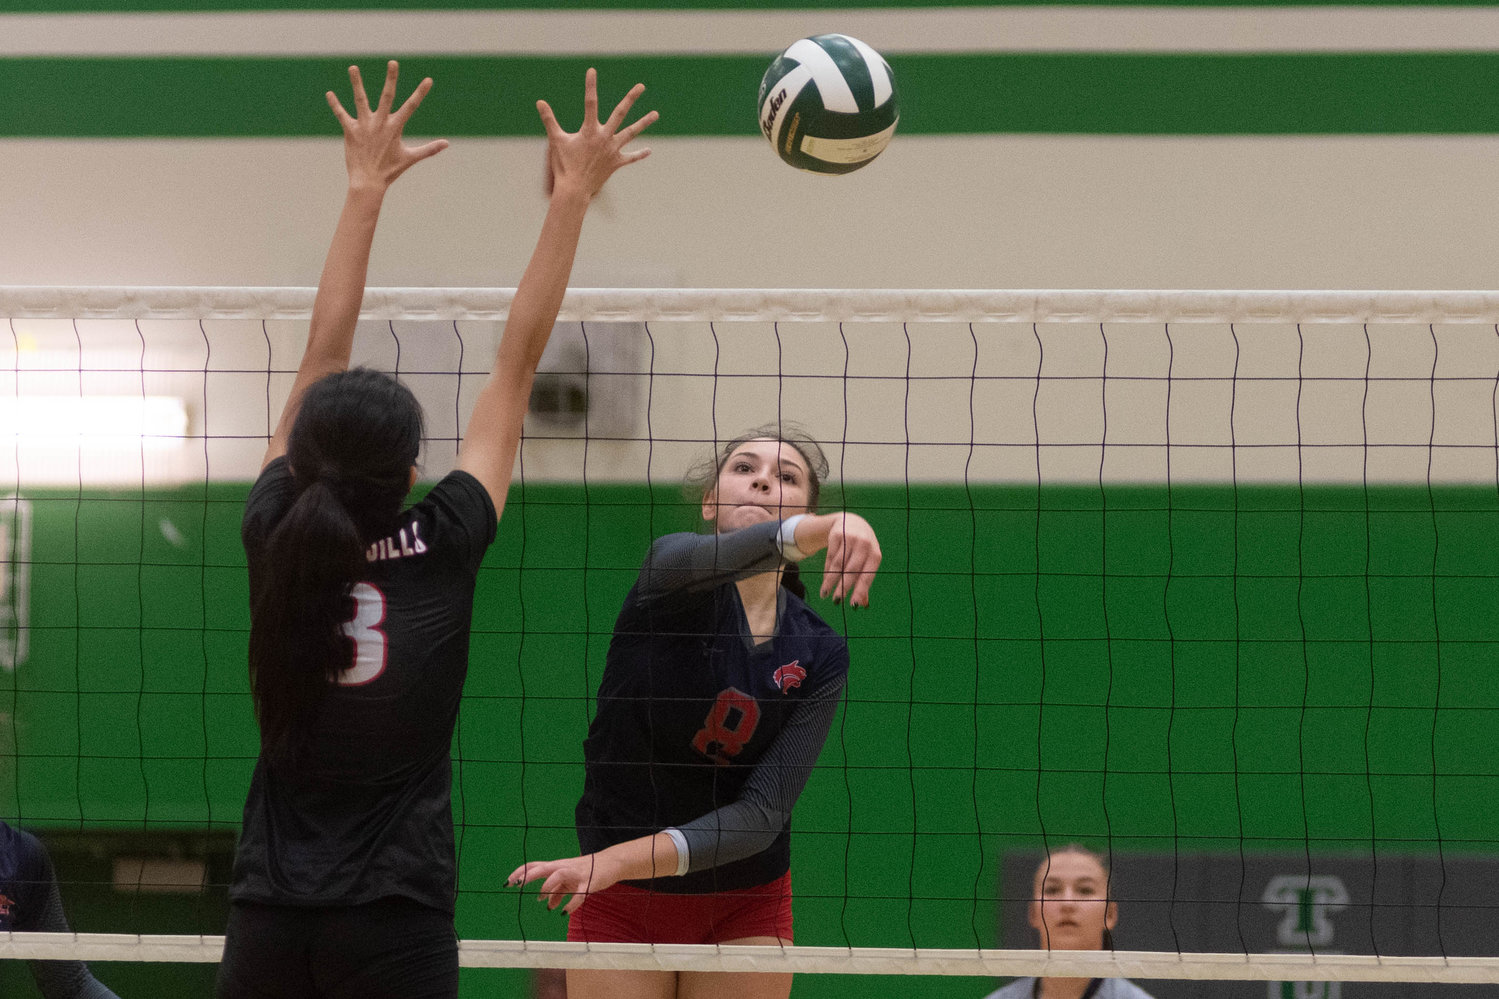 Black Hills middle Payton Childers sends a shot over the net against R.A. Long in the opening round of the 2A District 4 tournament in Tumwater Nov. 11.